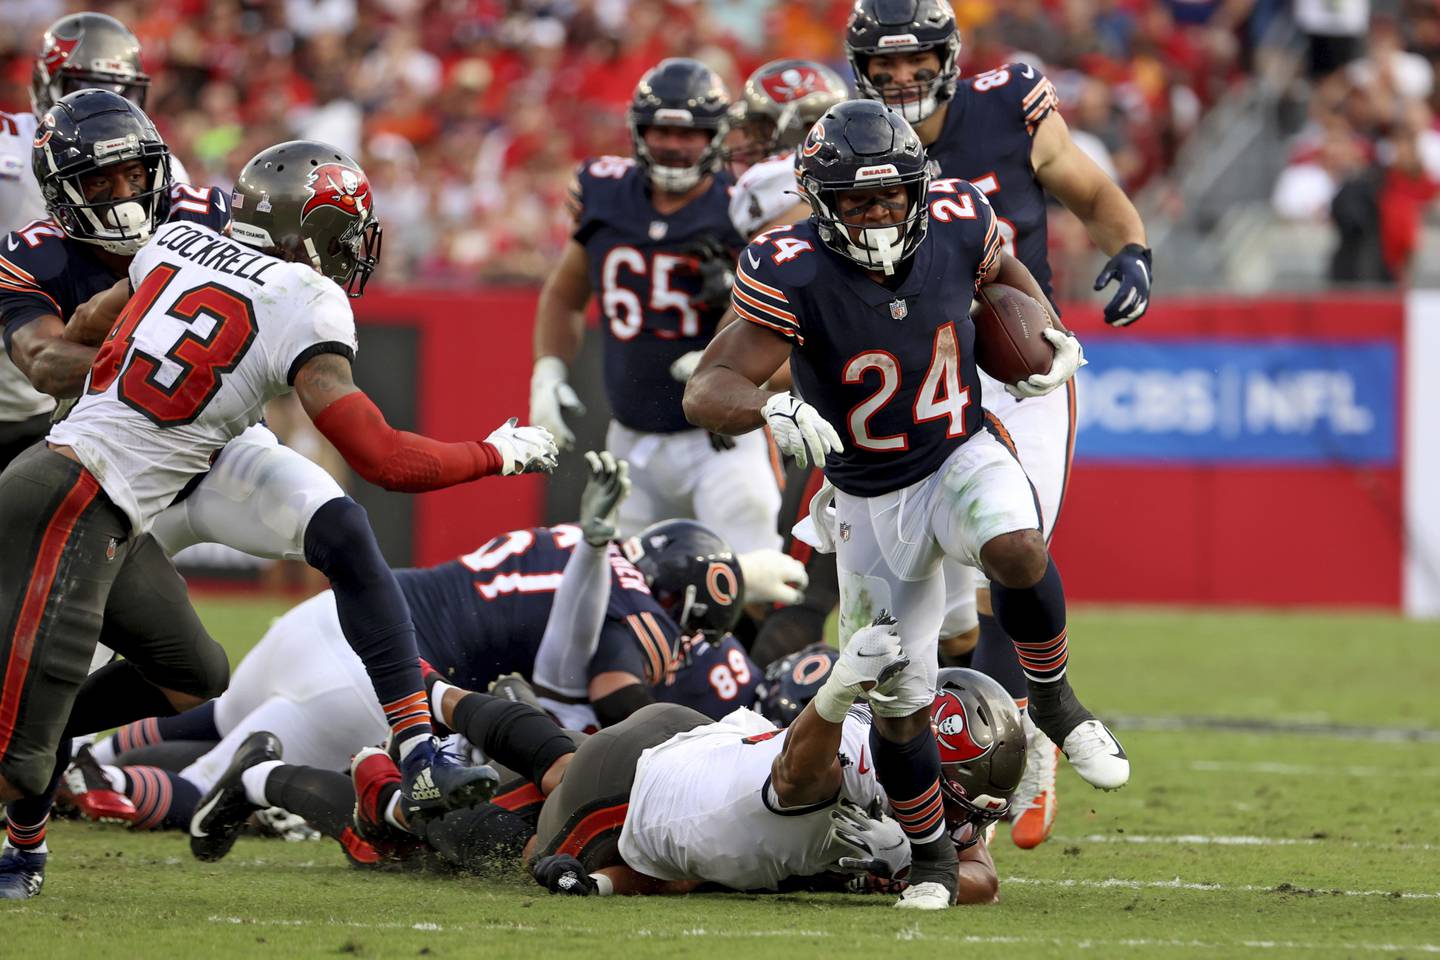 Chicago Bears running back Khalil Herbert (24) rushes the ball against the Tampa Bay Buccaneers, Sunday, Oct. 24th, 2021 in Tampa, Fla. (AP Photo/Don Montague)